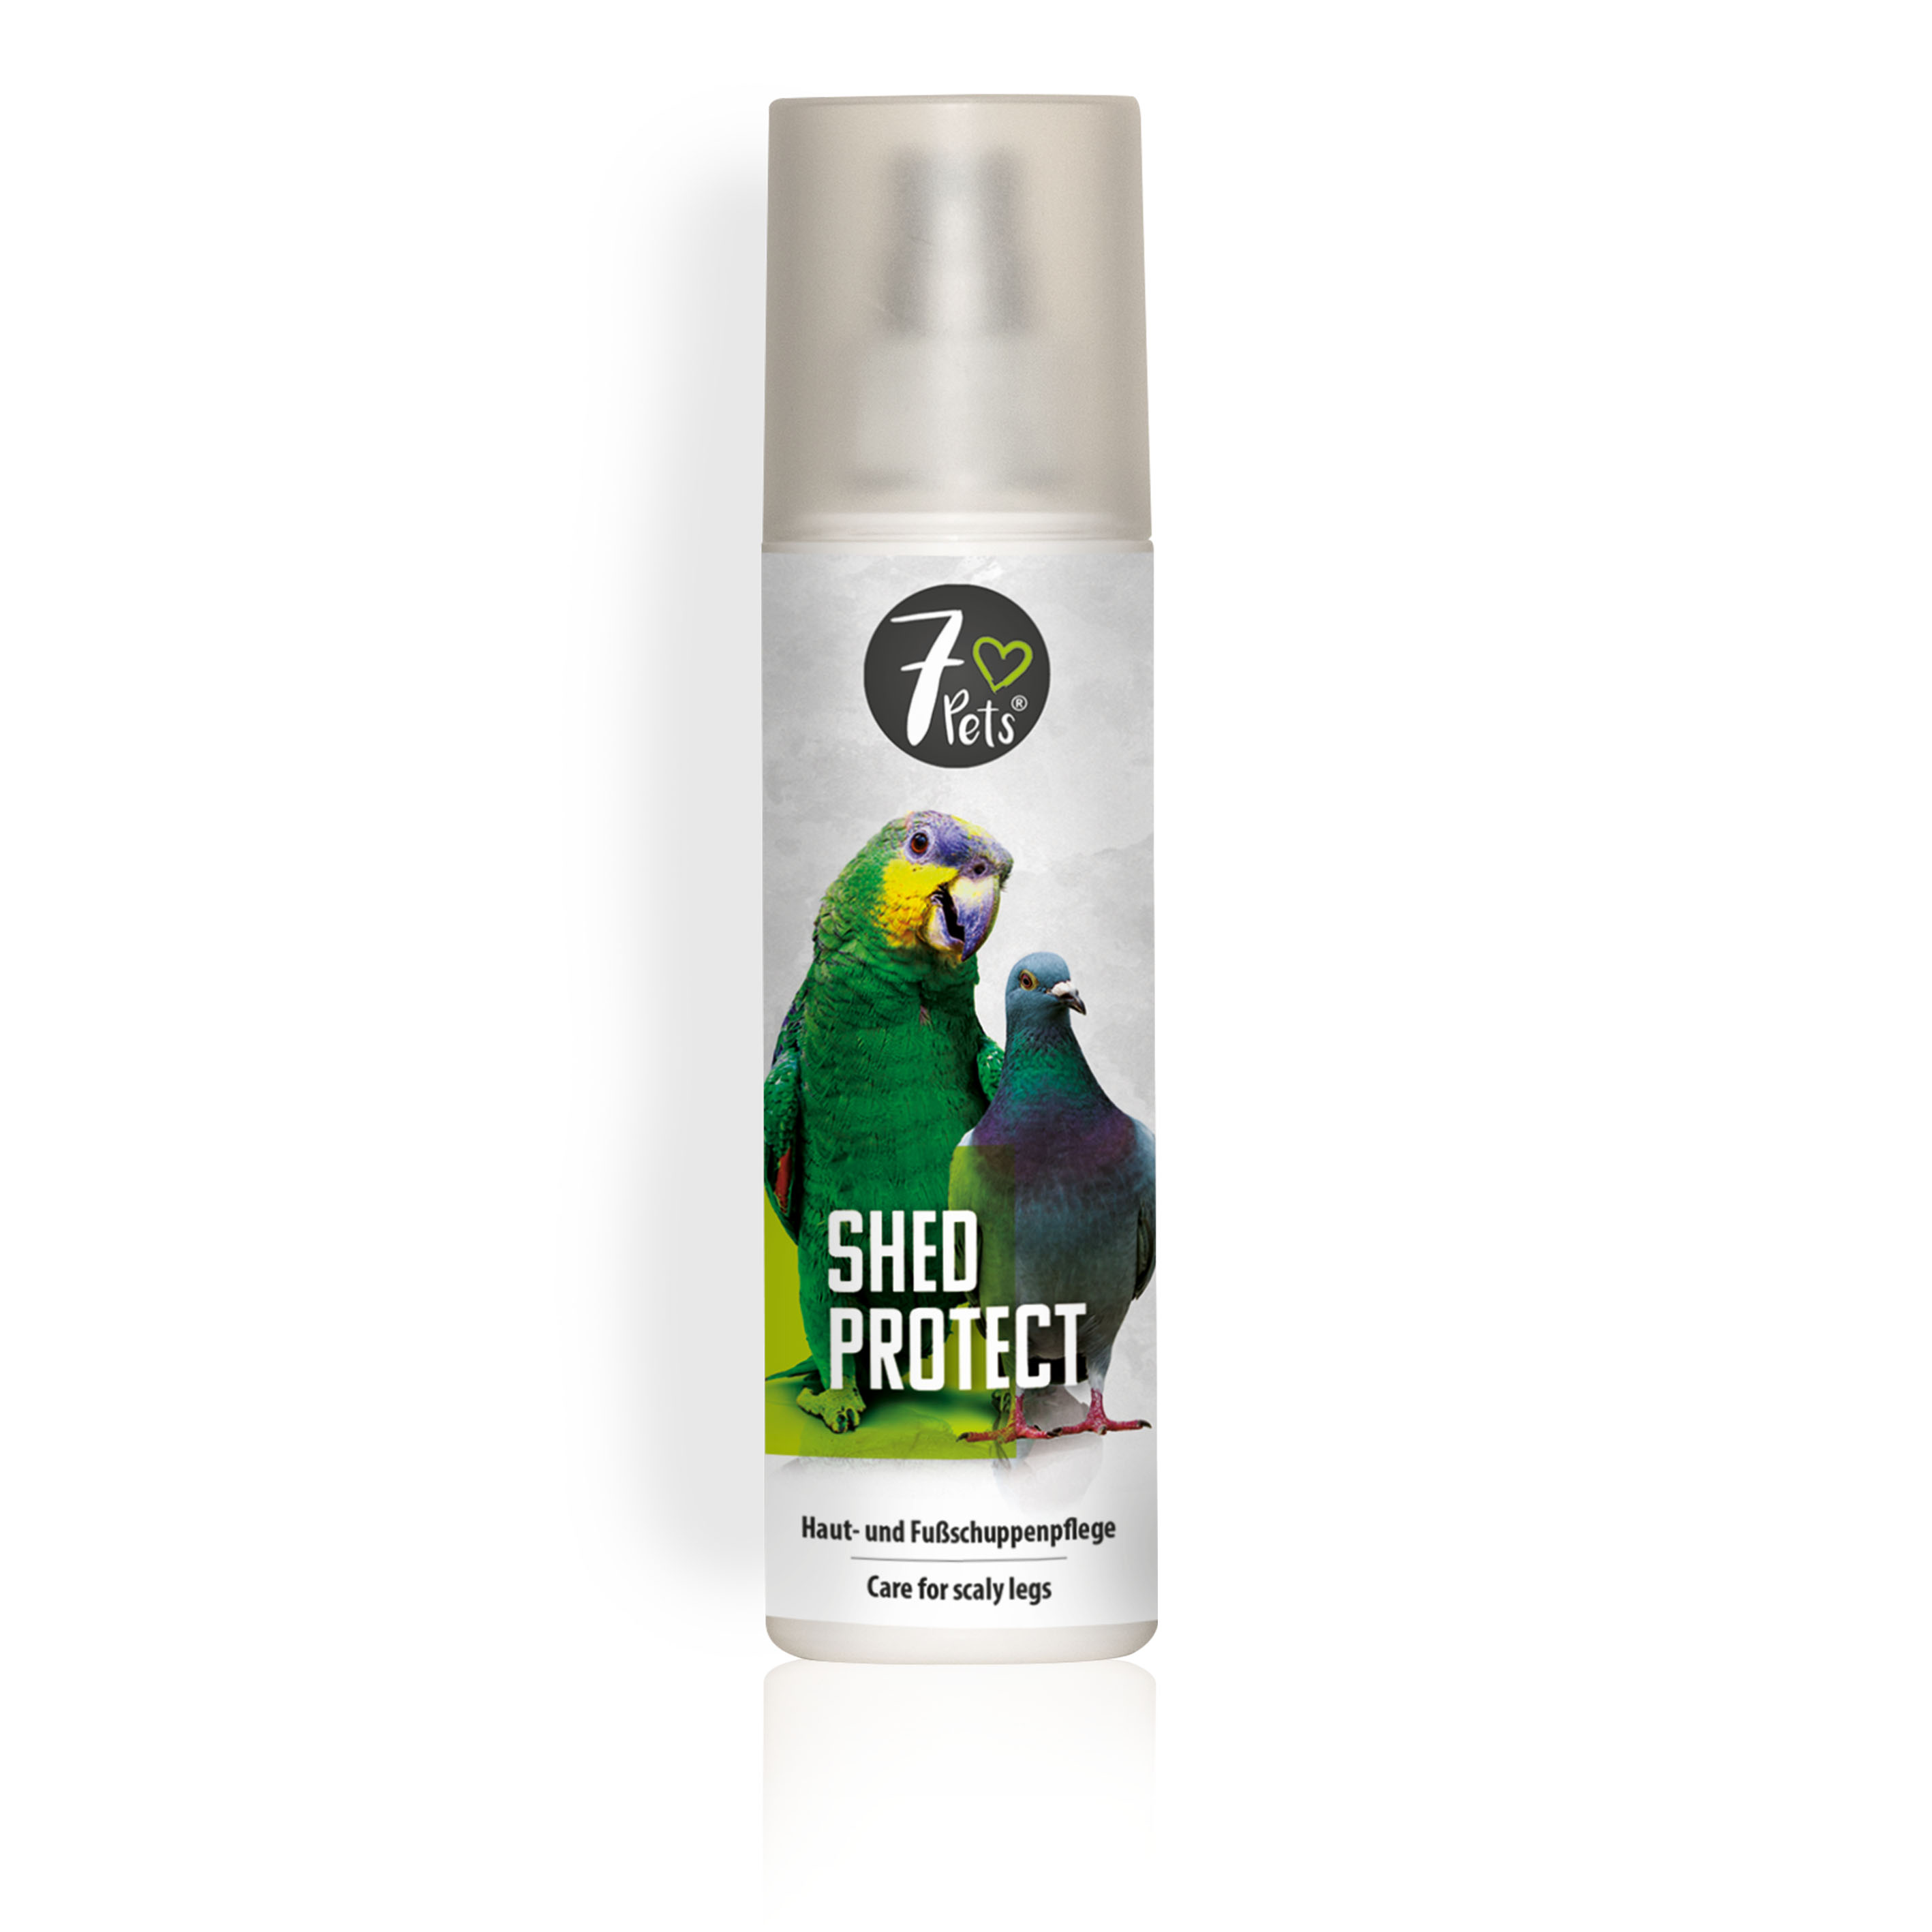 7Pets Shed Protect 200 ml